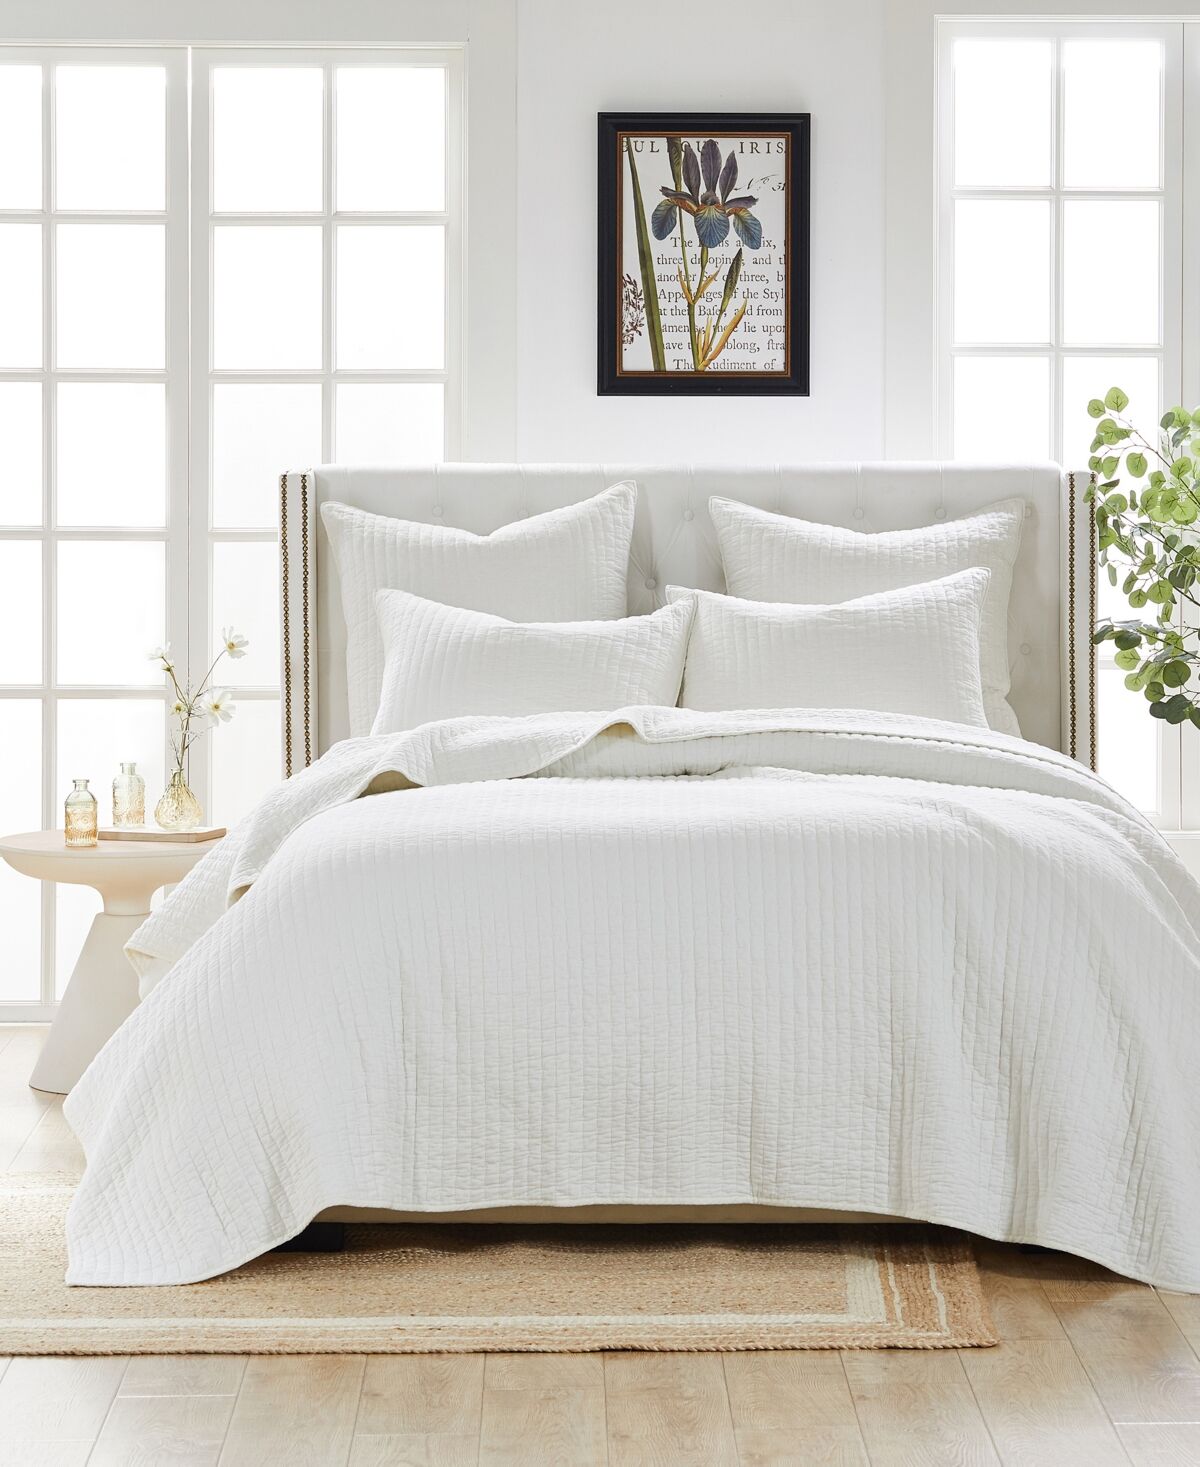 Greenland Home Fashions Monterrey Finely-Stitched Cotton 3 Piece Quilt Set, King - Off-White